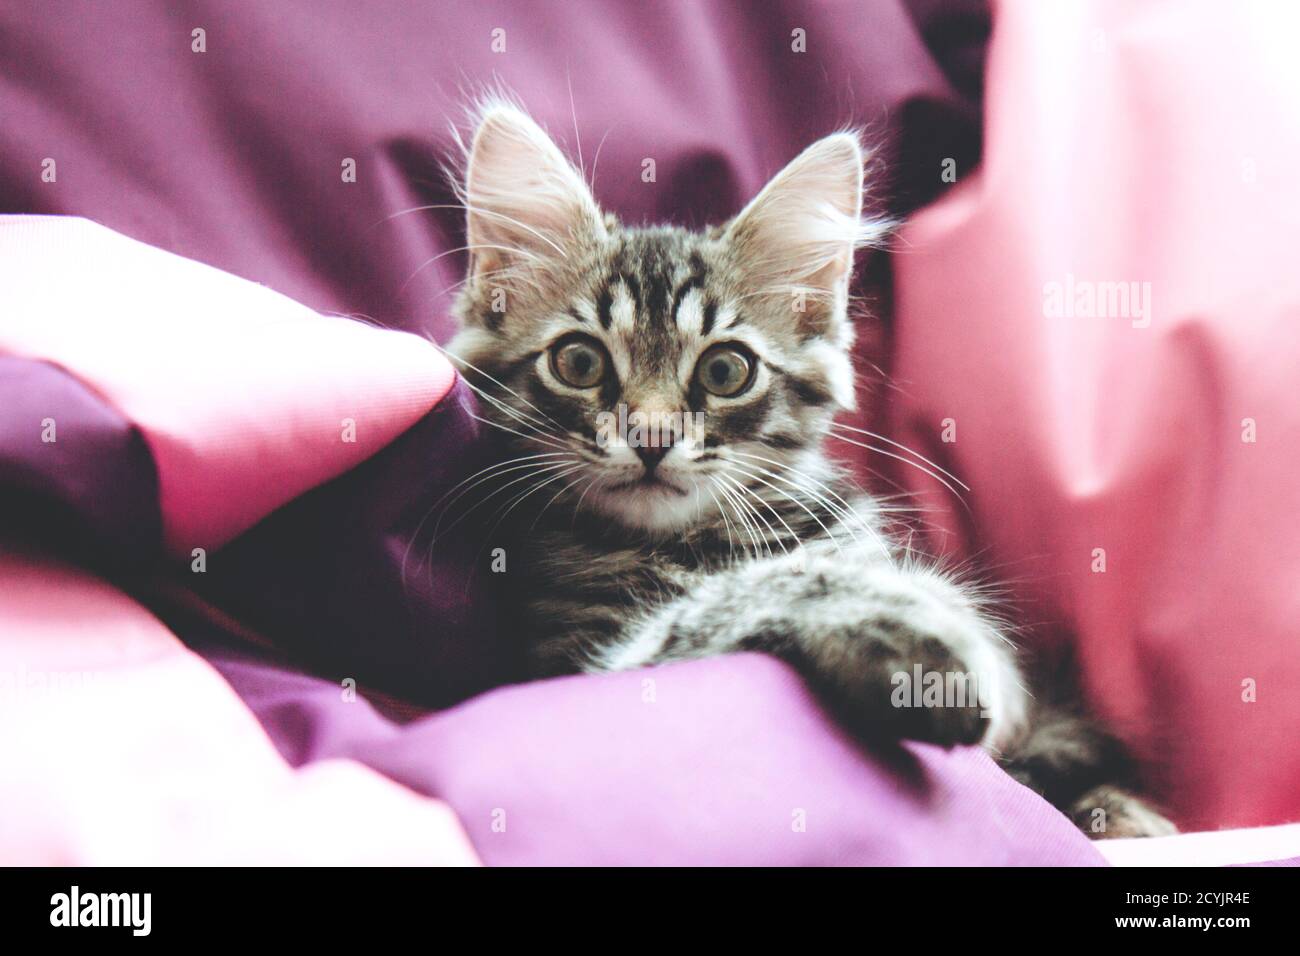 Funny gray tabby cute kitten with beautiful big eyes on bright trendy pink background. Lovely fluffy cat on colored background. Fluffy pet is gazing c Stock Photo